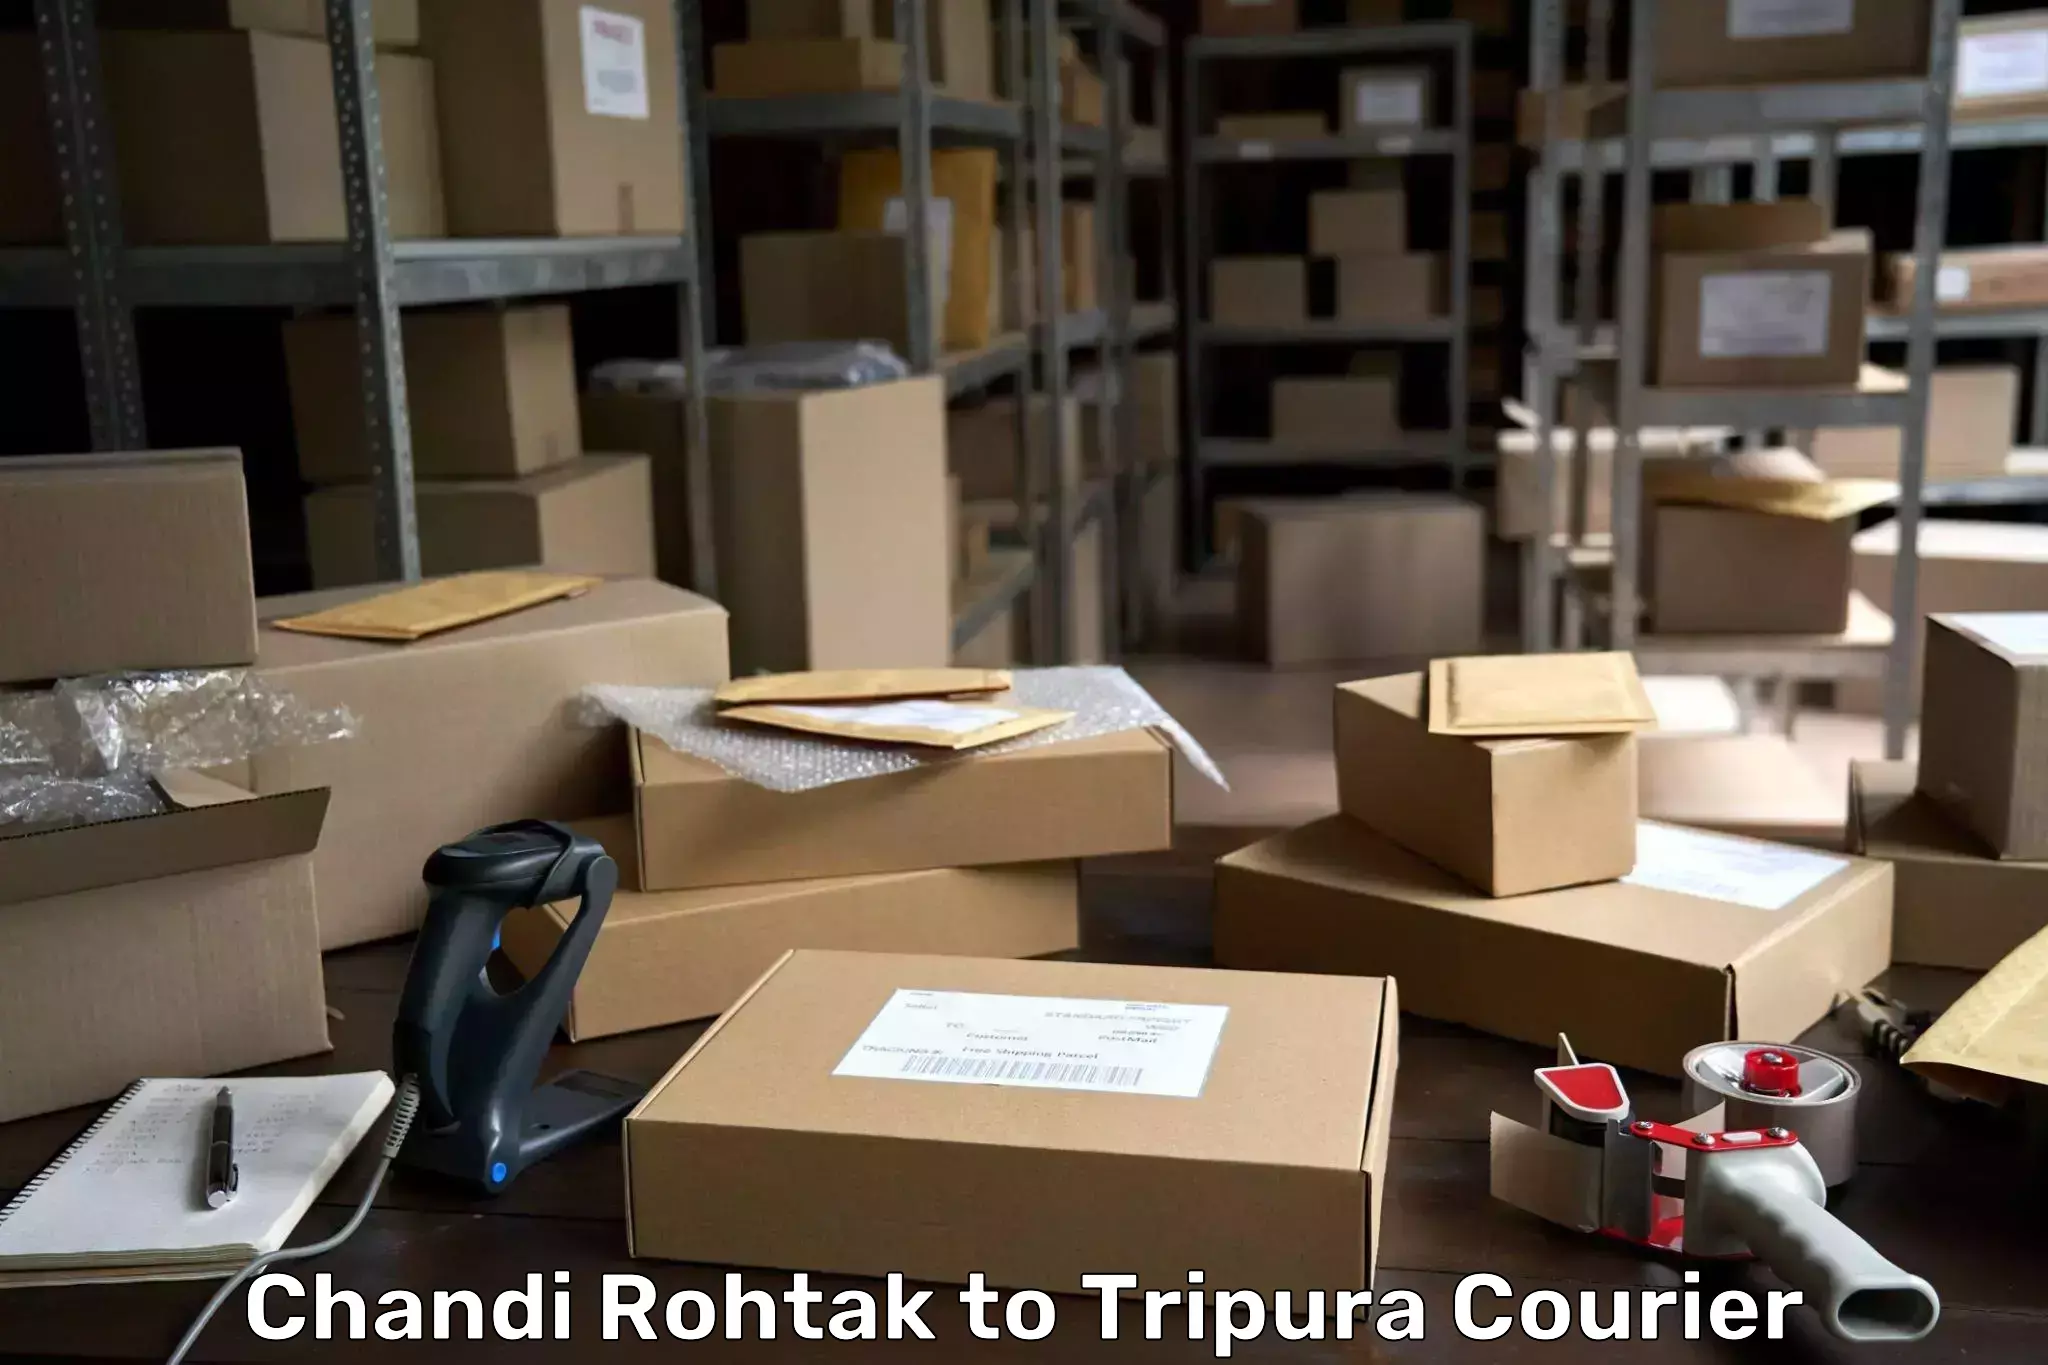 Express delivery capabilities Chandi Rohtak to Tripura